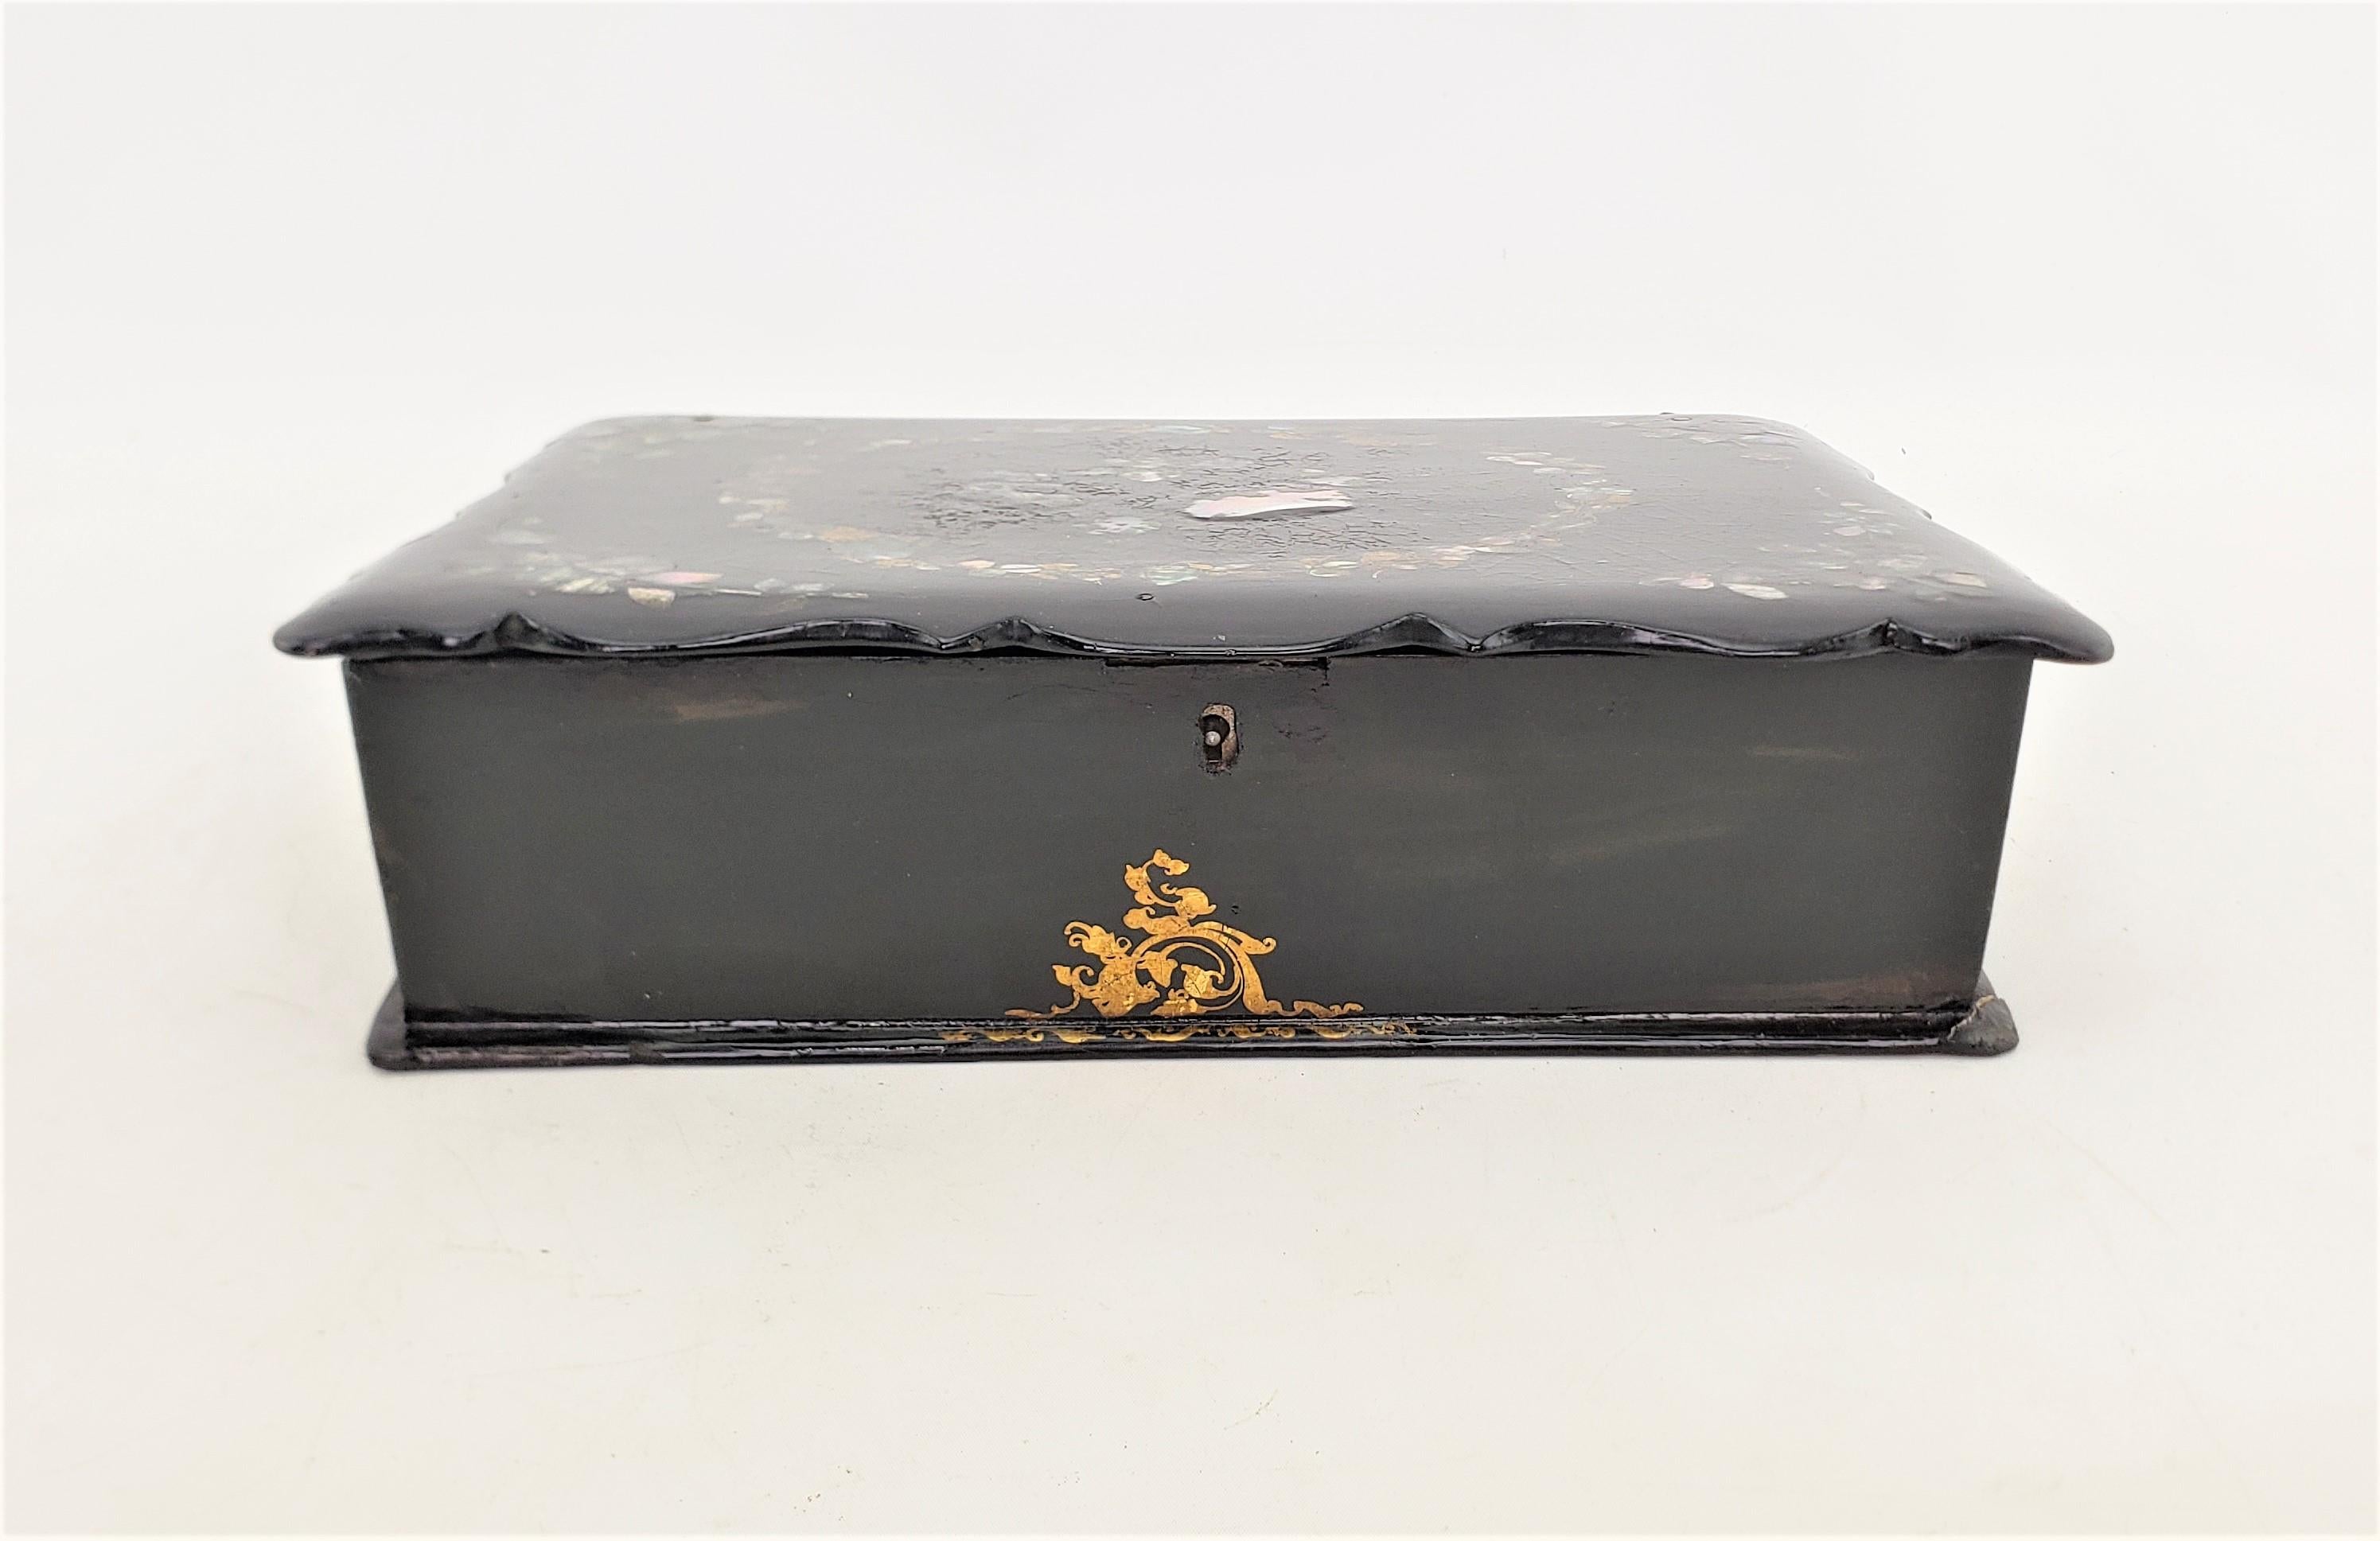 This antique writing box or lap desk is unsigned, but presumed to have originated from England and date to approximately 1880 and done in the period Victorian style. The box is constructed of paper mache which has been treated with a lacquer finish